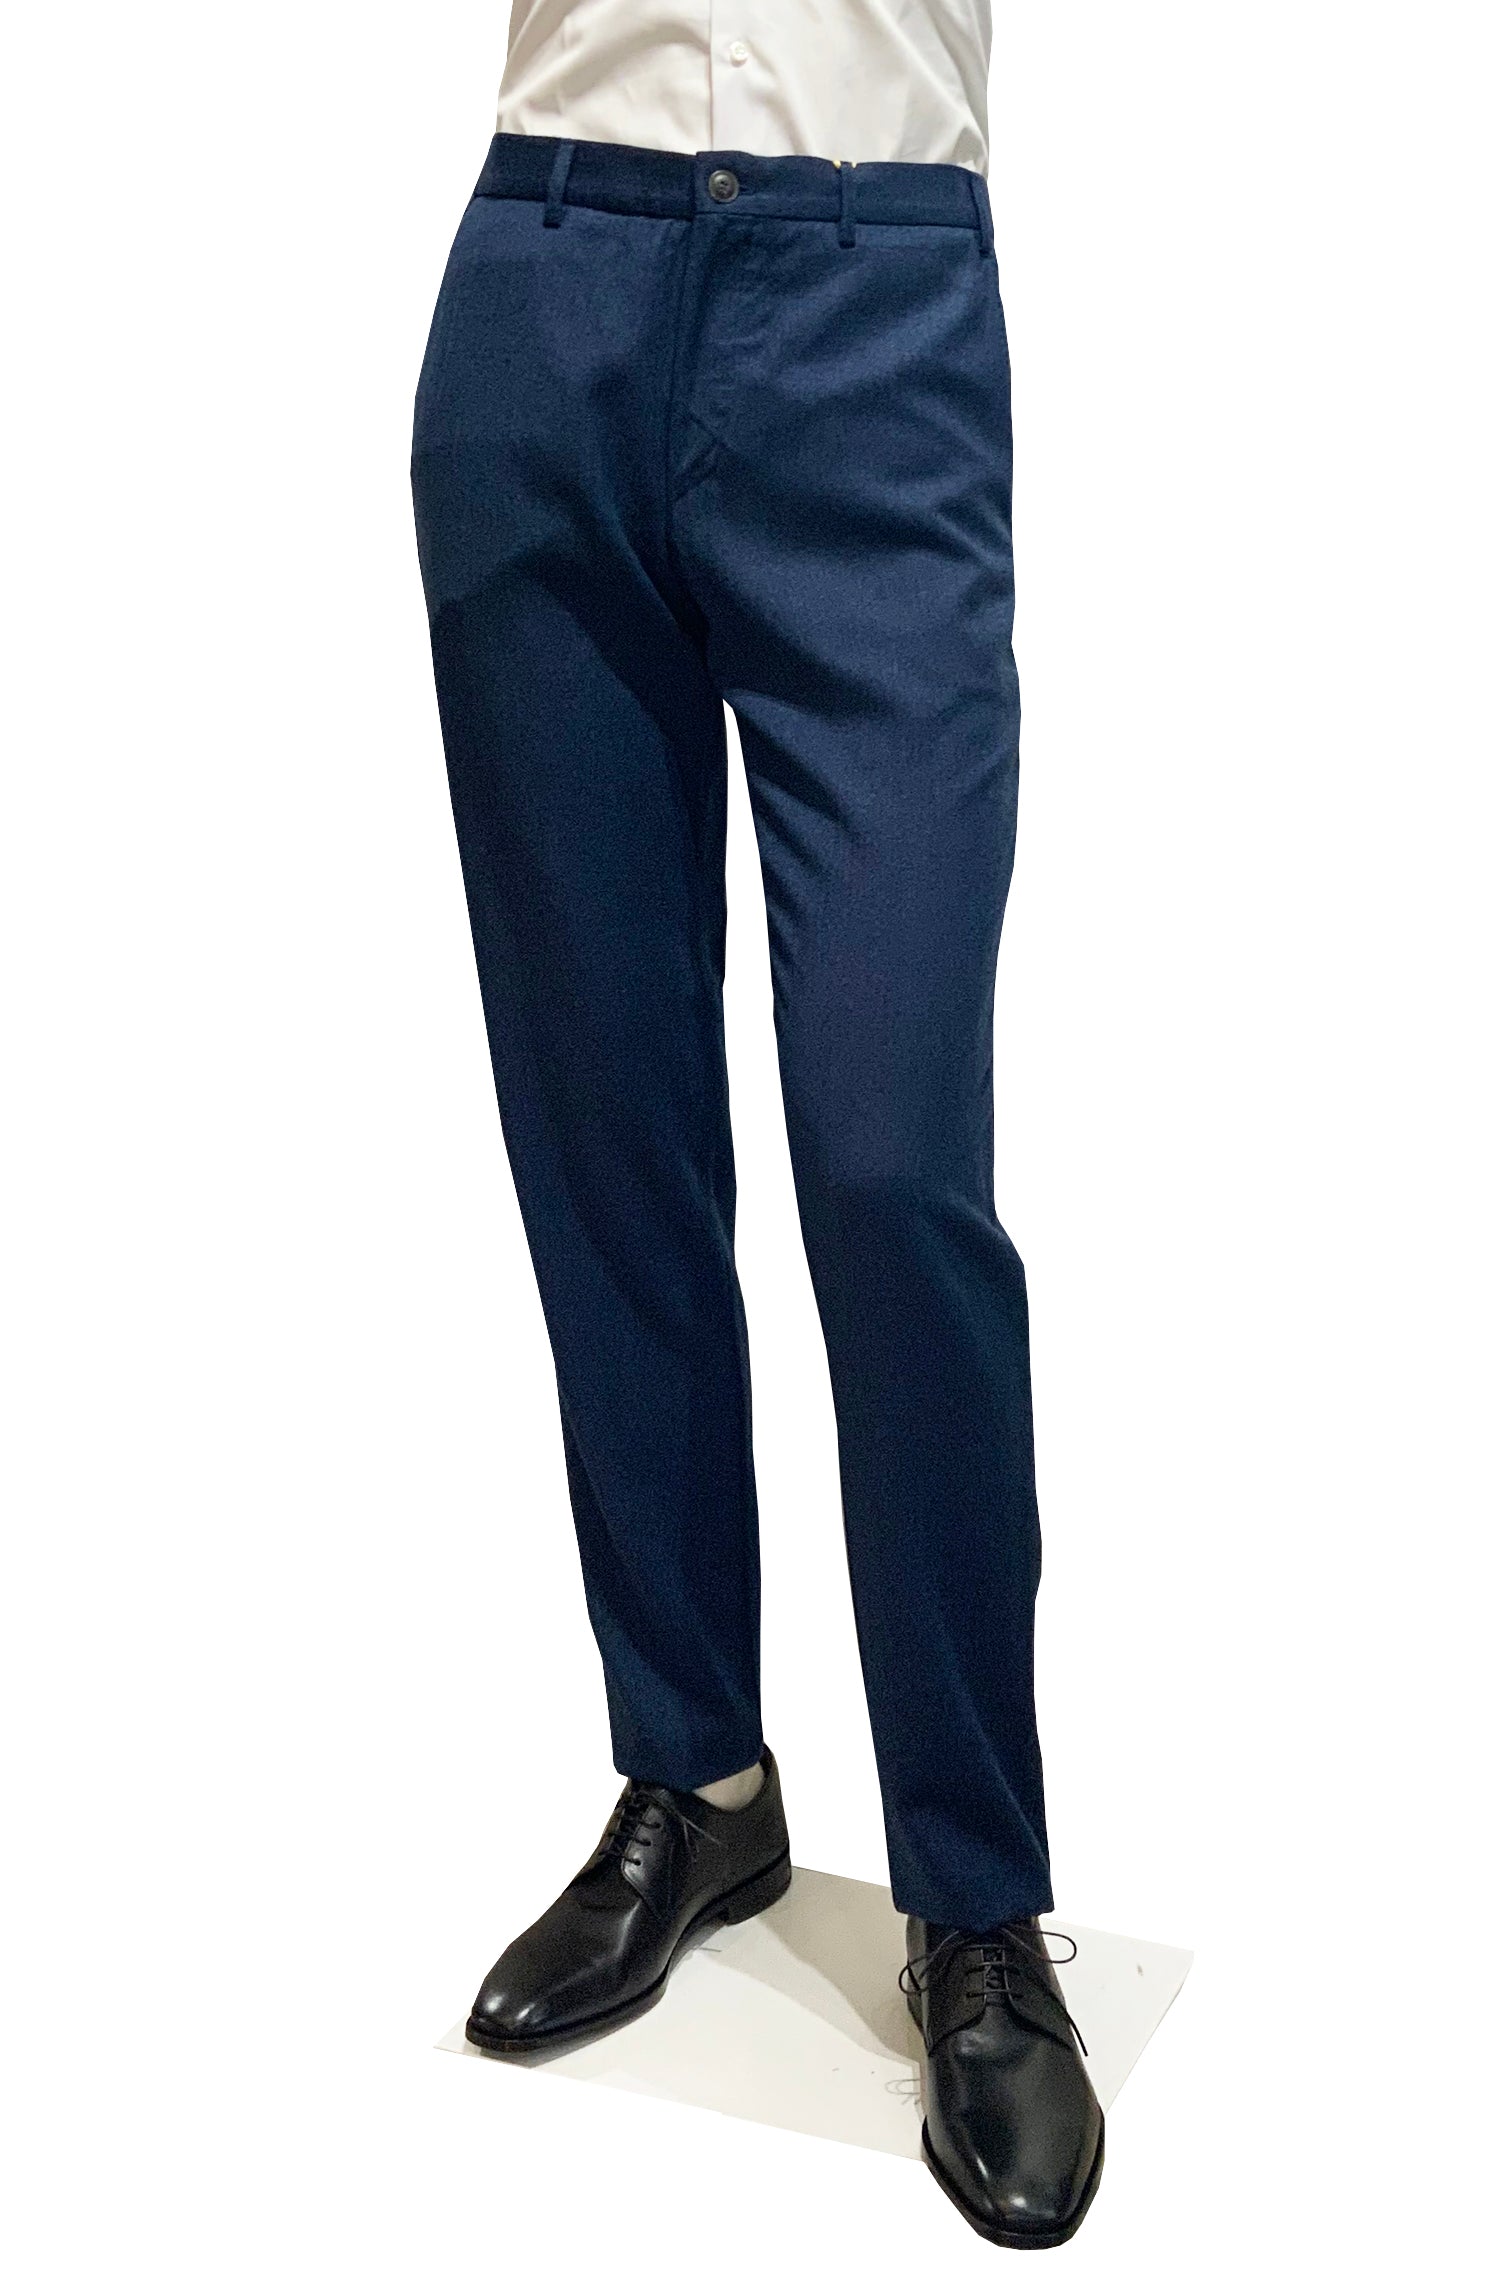 CANALI - Blue Impeccable Wool Smart Casual Trousers V1019-AR03472-301